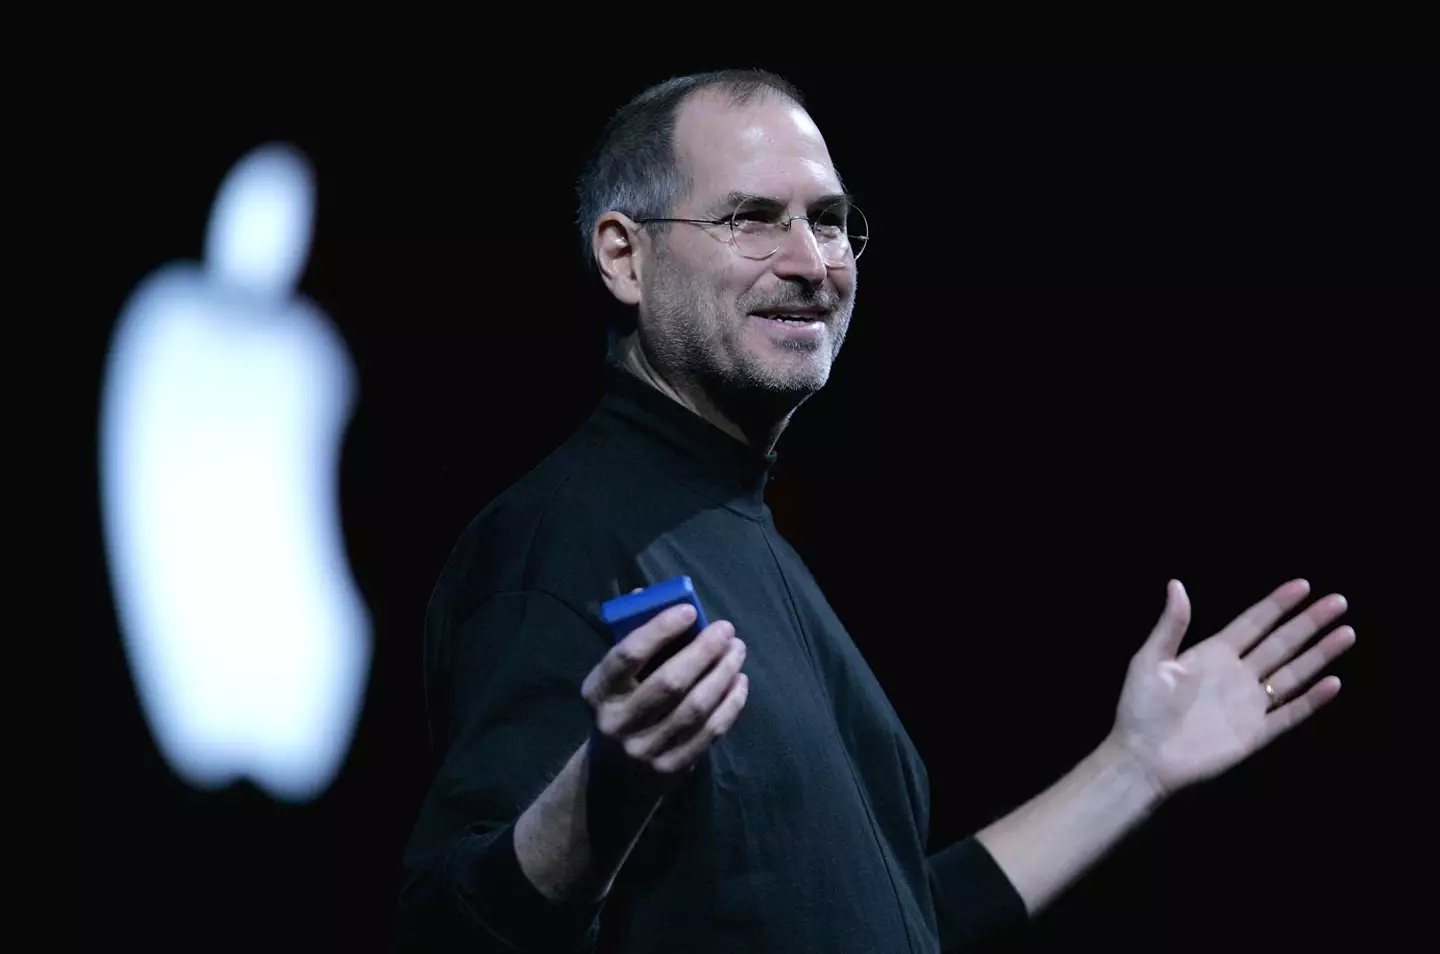 Apple co-founder Steve Jobs had previously confirmed the meaning.